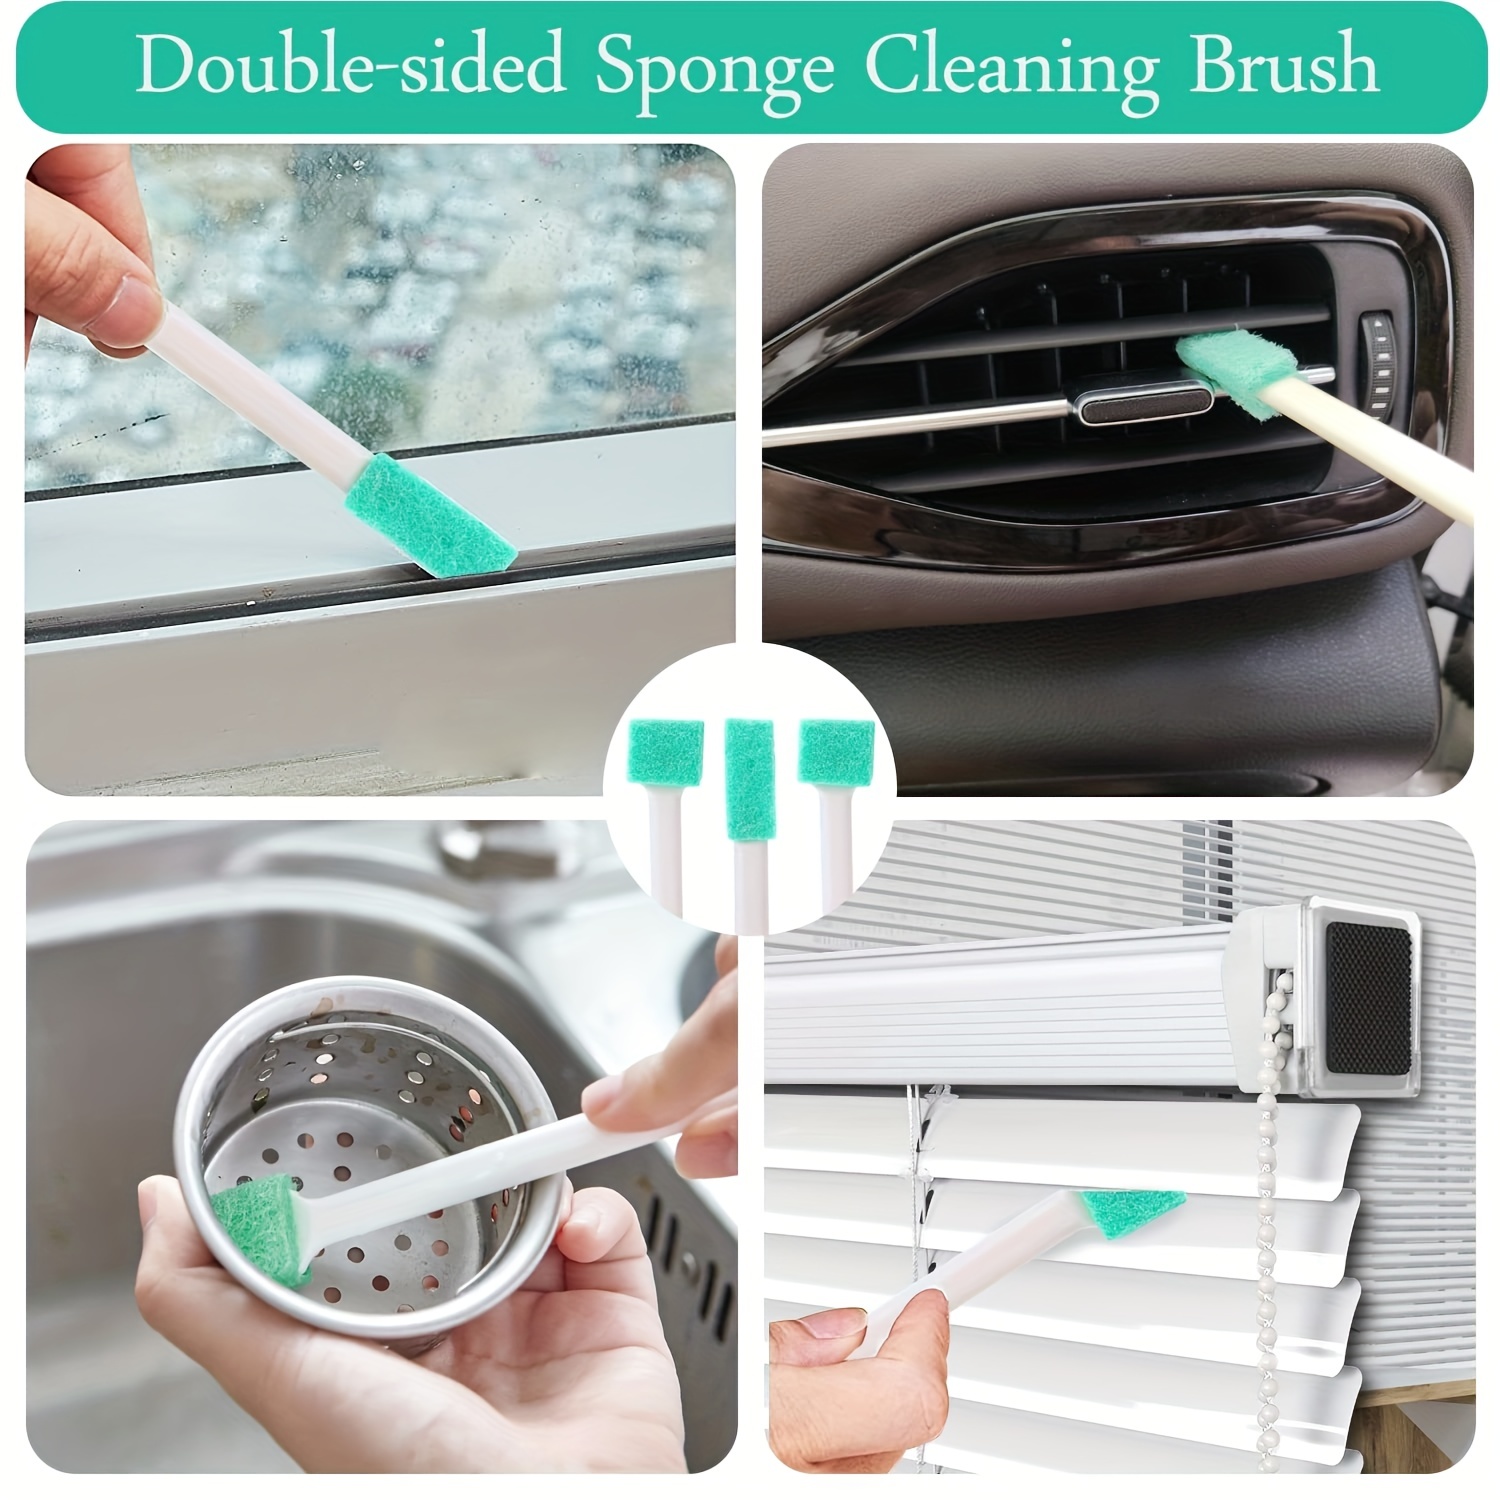 Small Cleaning Brushes For Household Cleaning, Crevice Cleaning